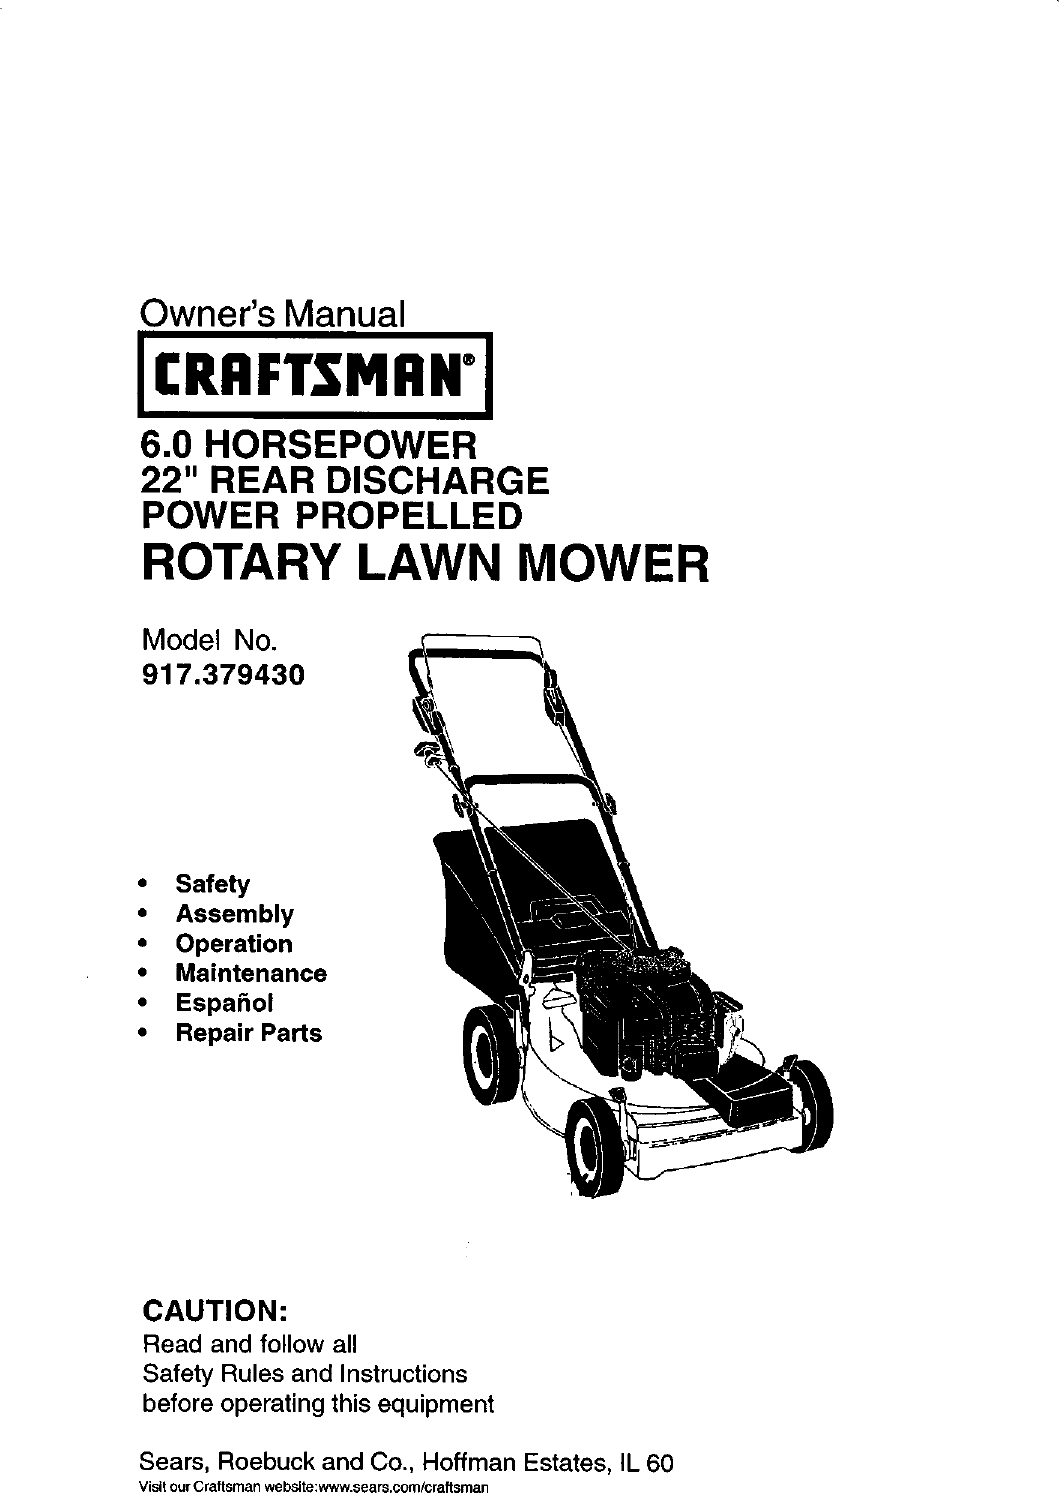 Craftsman 917379430 User Manual 22 Lawn Mower Manuals And Guides L0101245